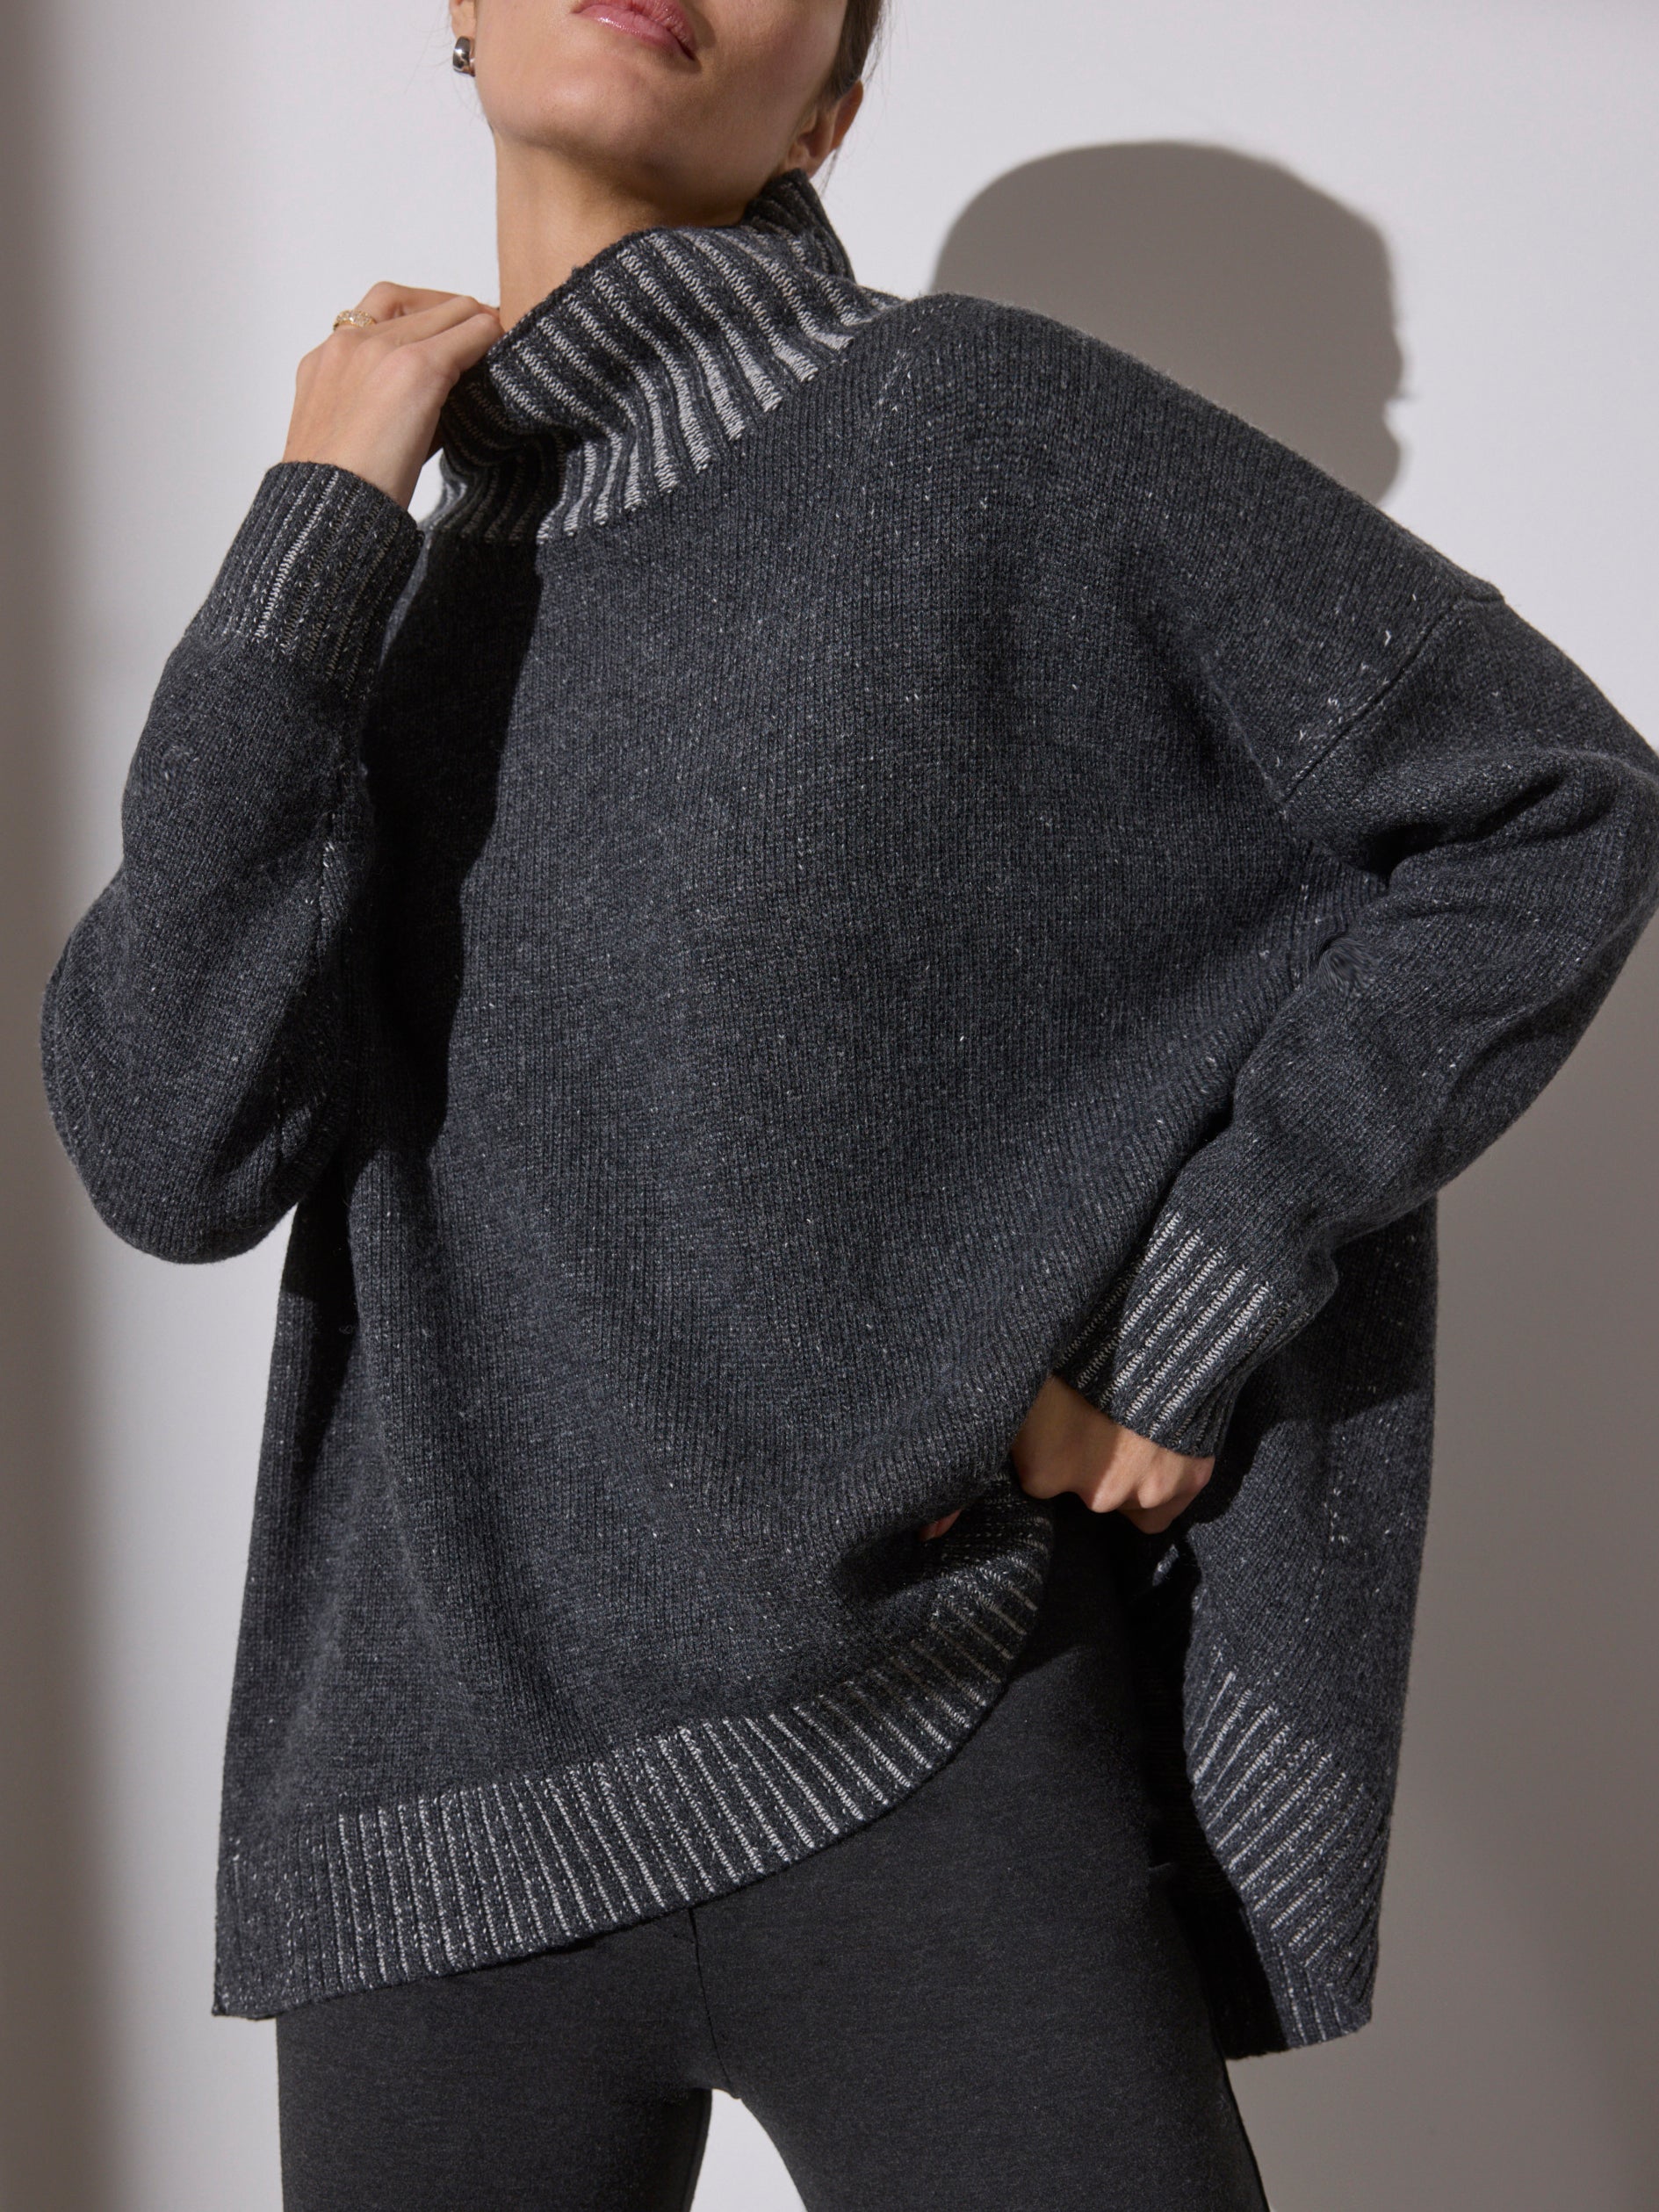 Ana gray turtleneck sweater front view